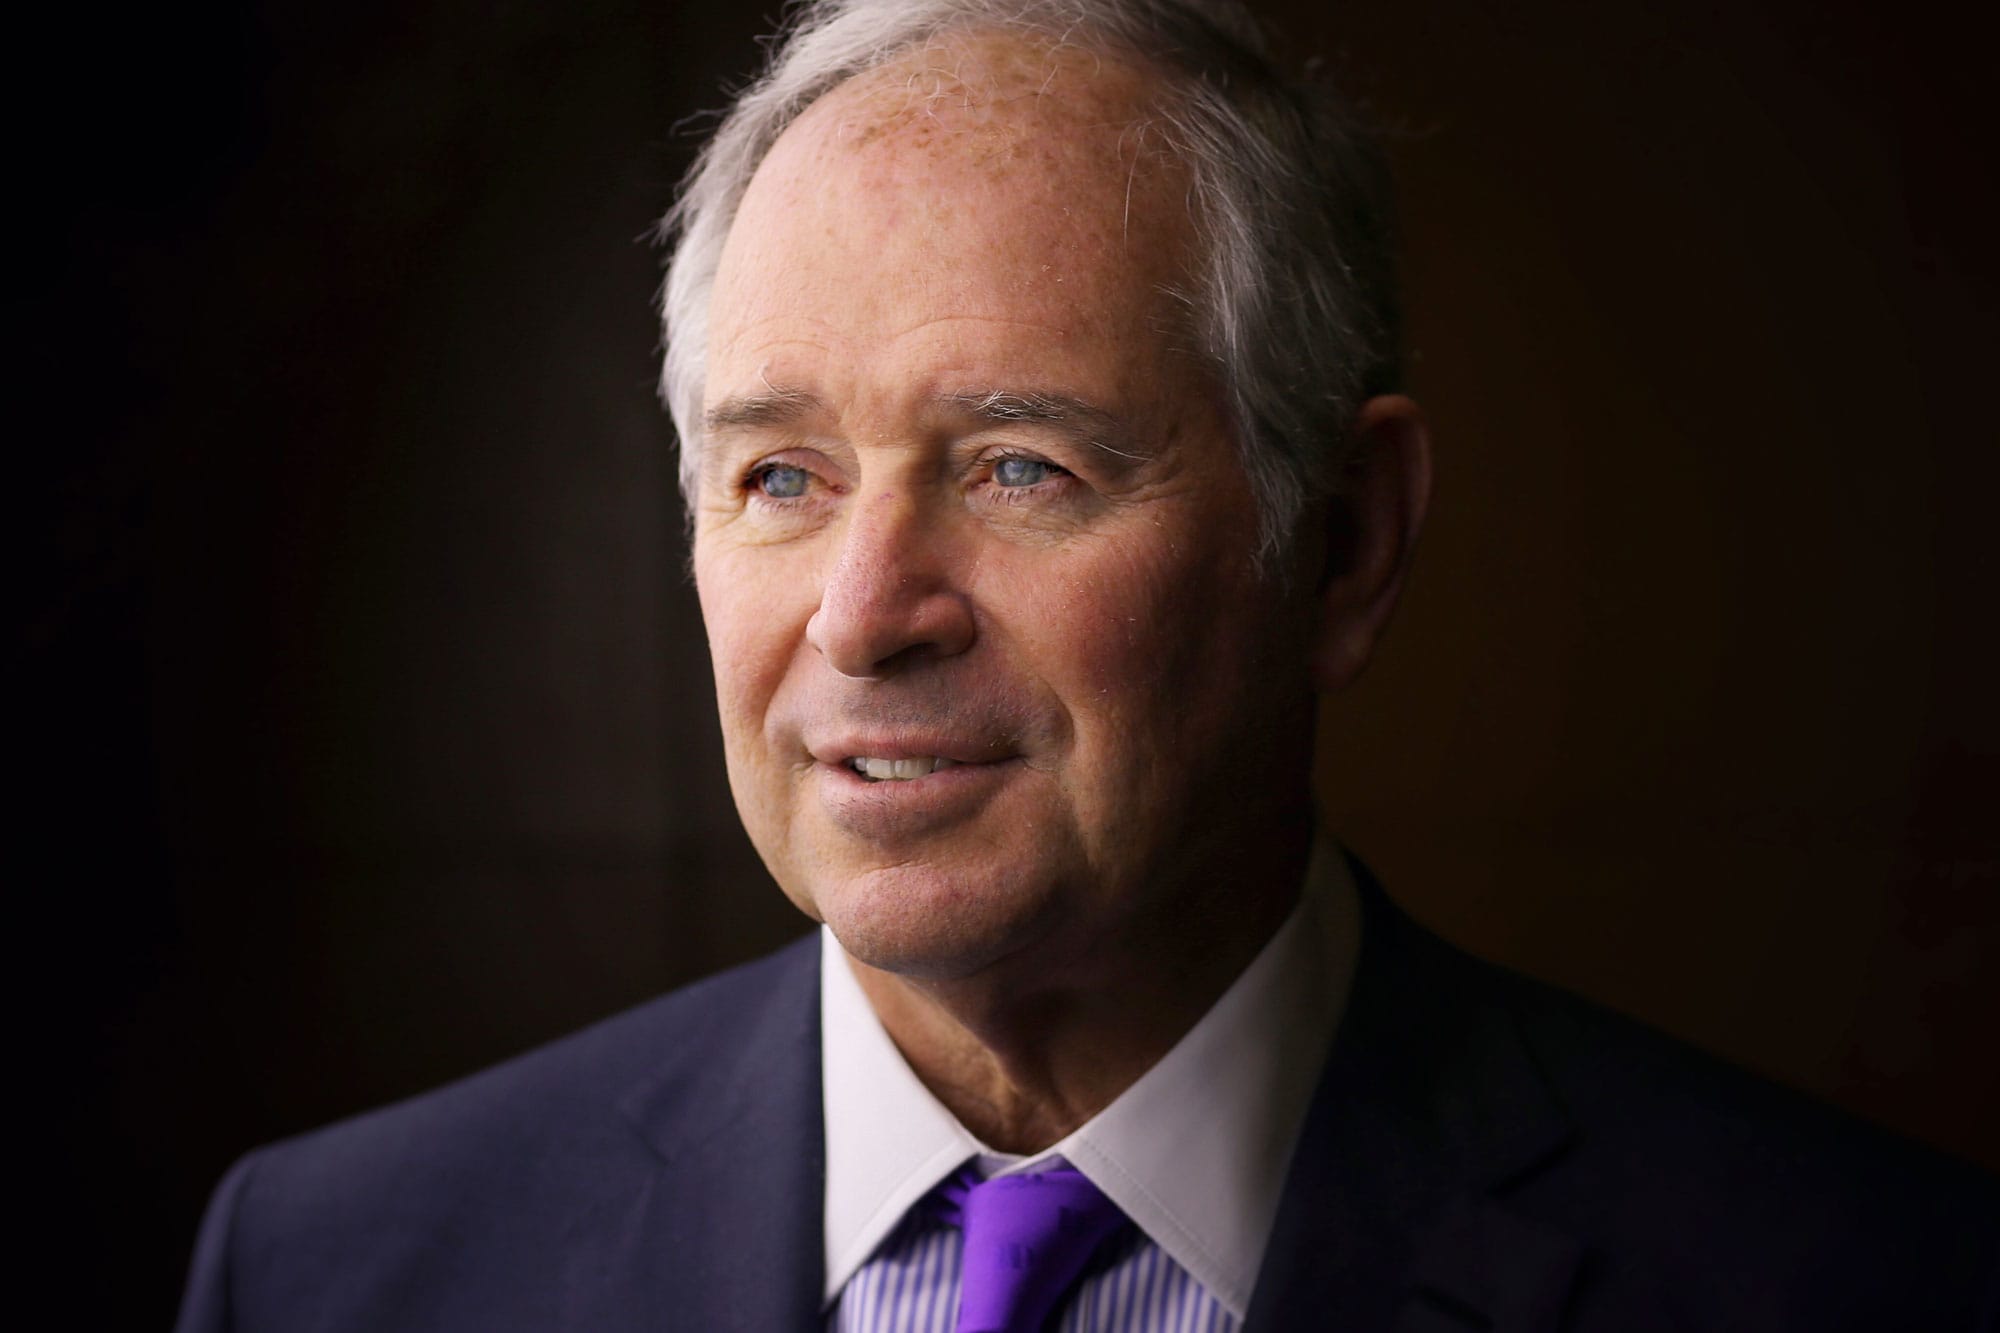 Fitch downgrade of long-term U.S. debt completely justified, Blackstone's Schwarzman says